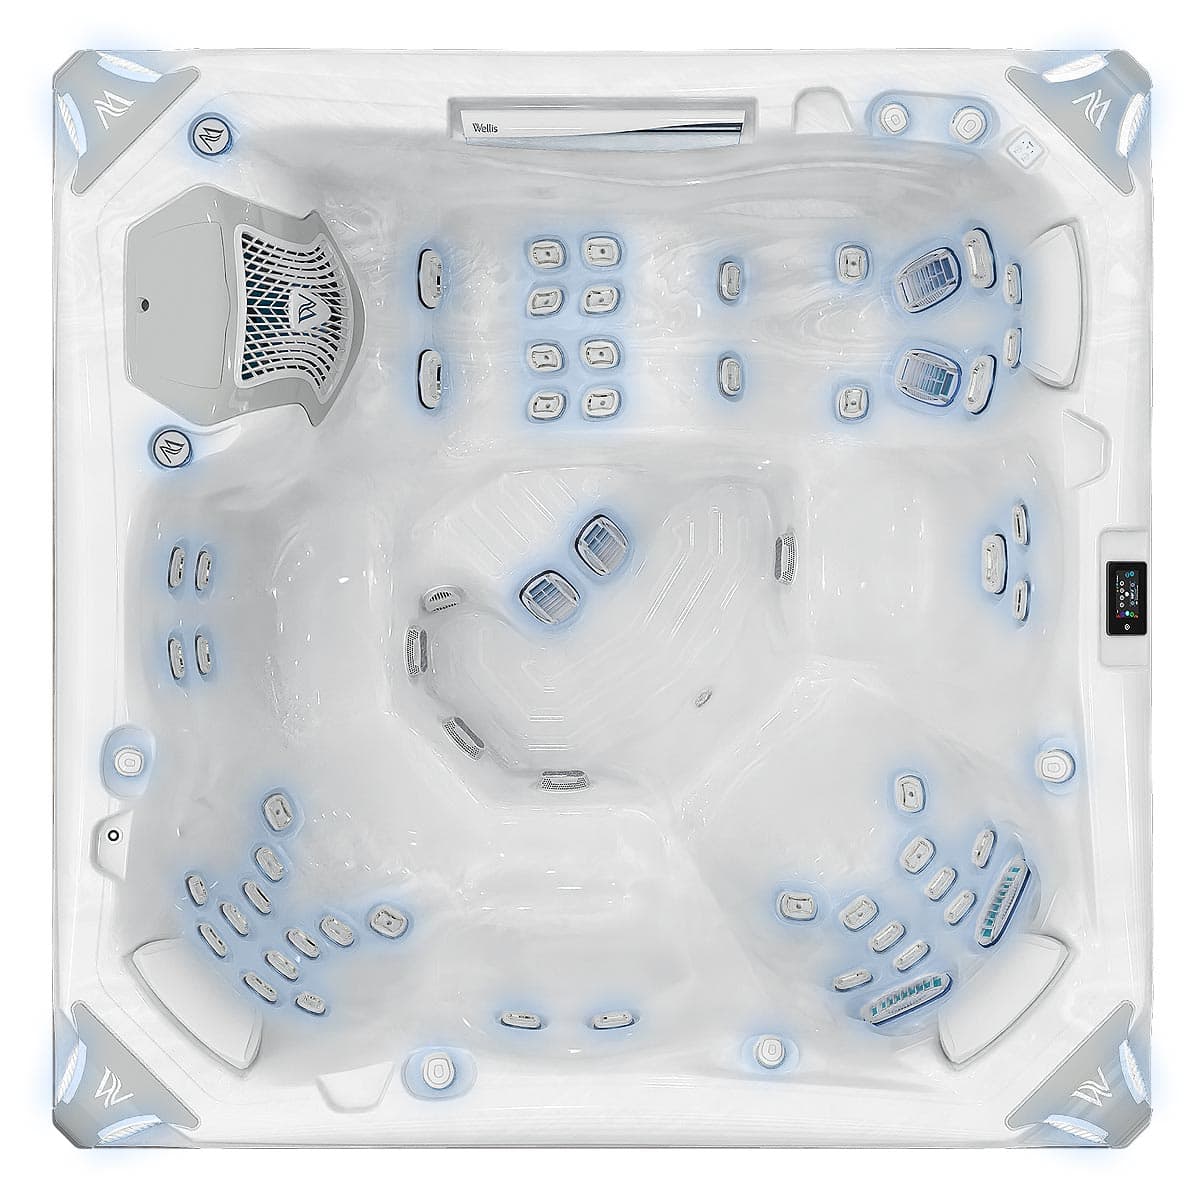 6-Person Tub | Life with Hot Wellis® Lounger Kilimanjaro